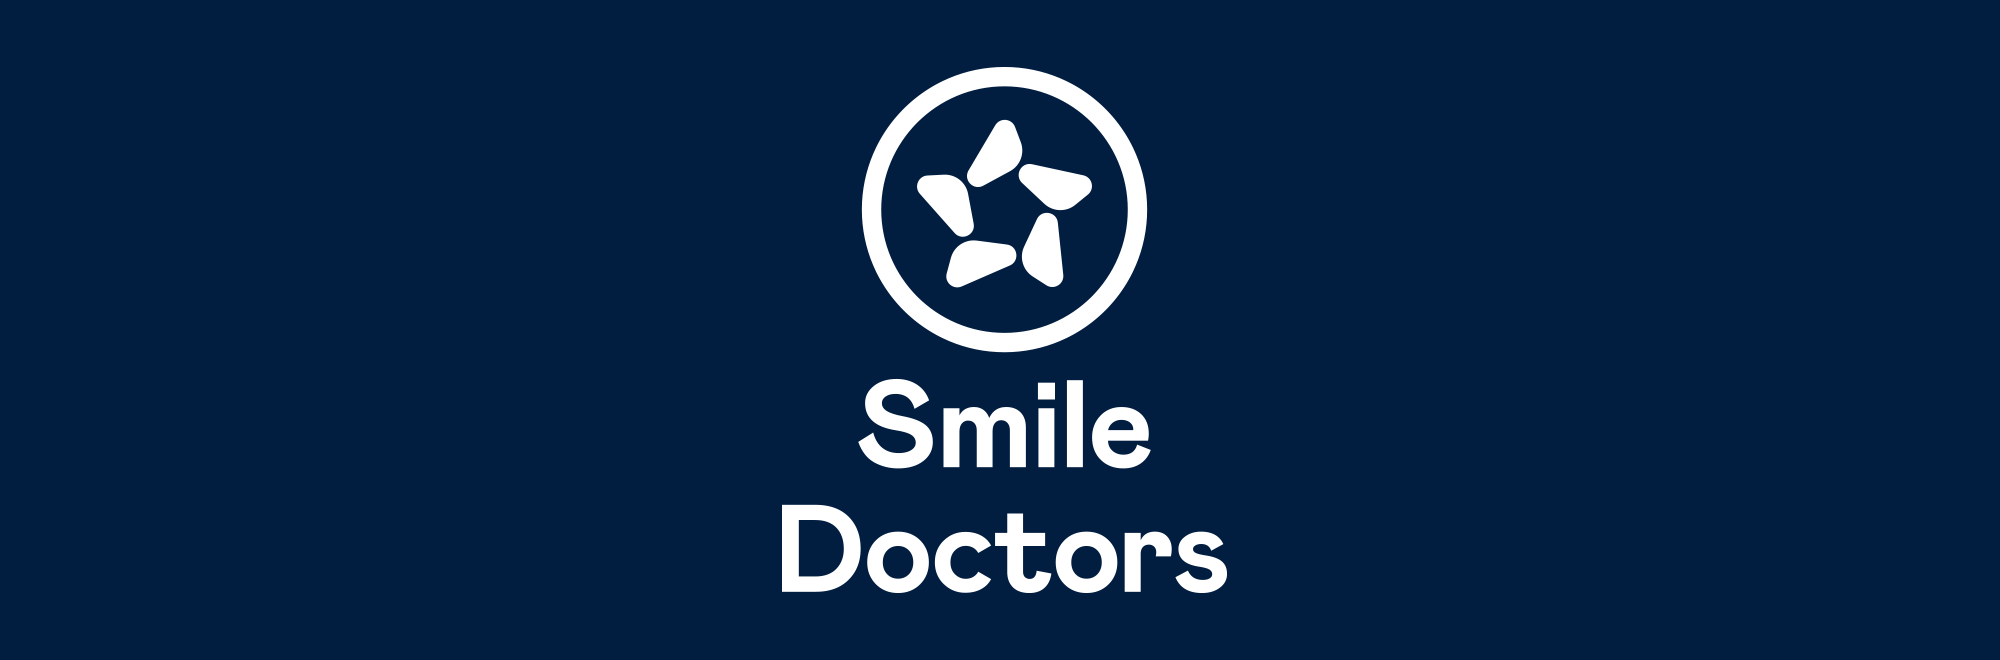 Smile Doctors Impressive 2022 Growth Positions the Organization for a Successful 2023